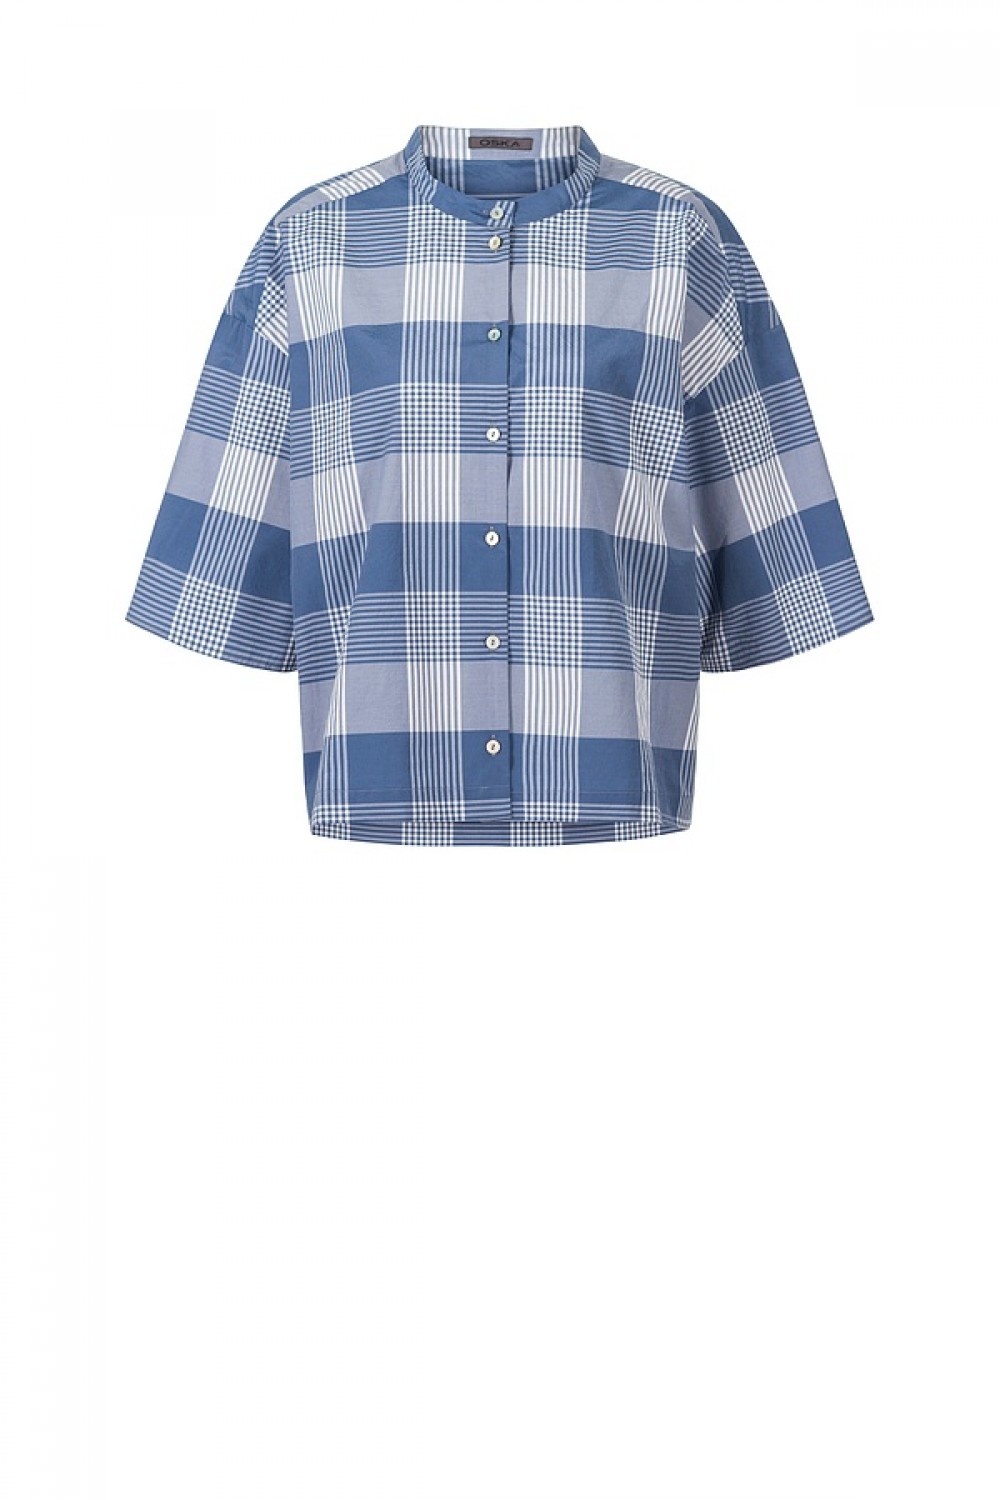 OSKA Blouse 419 Air / Cotton Blend with Gingham Check